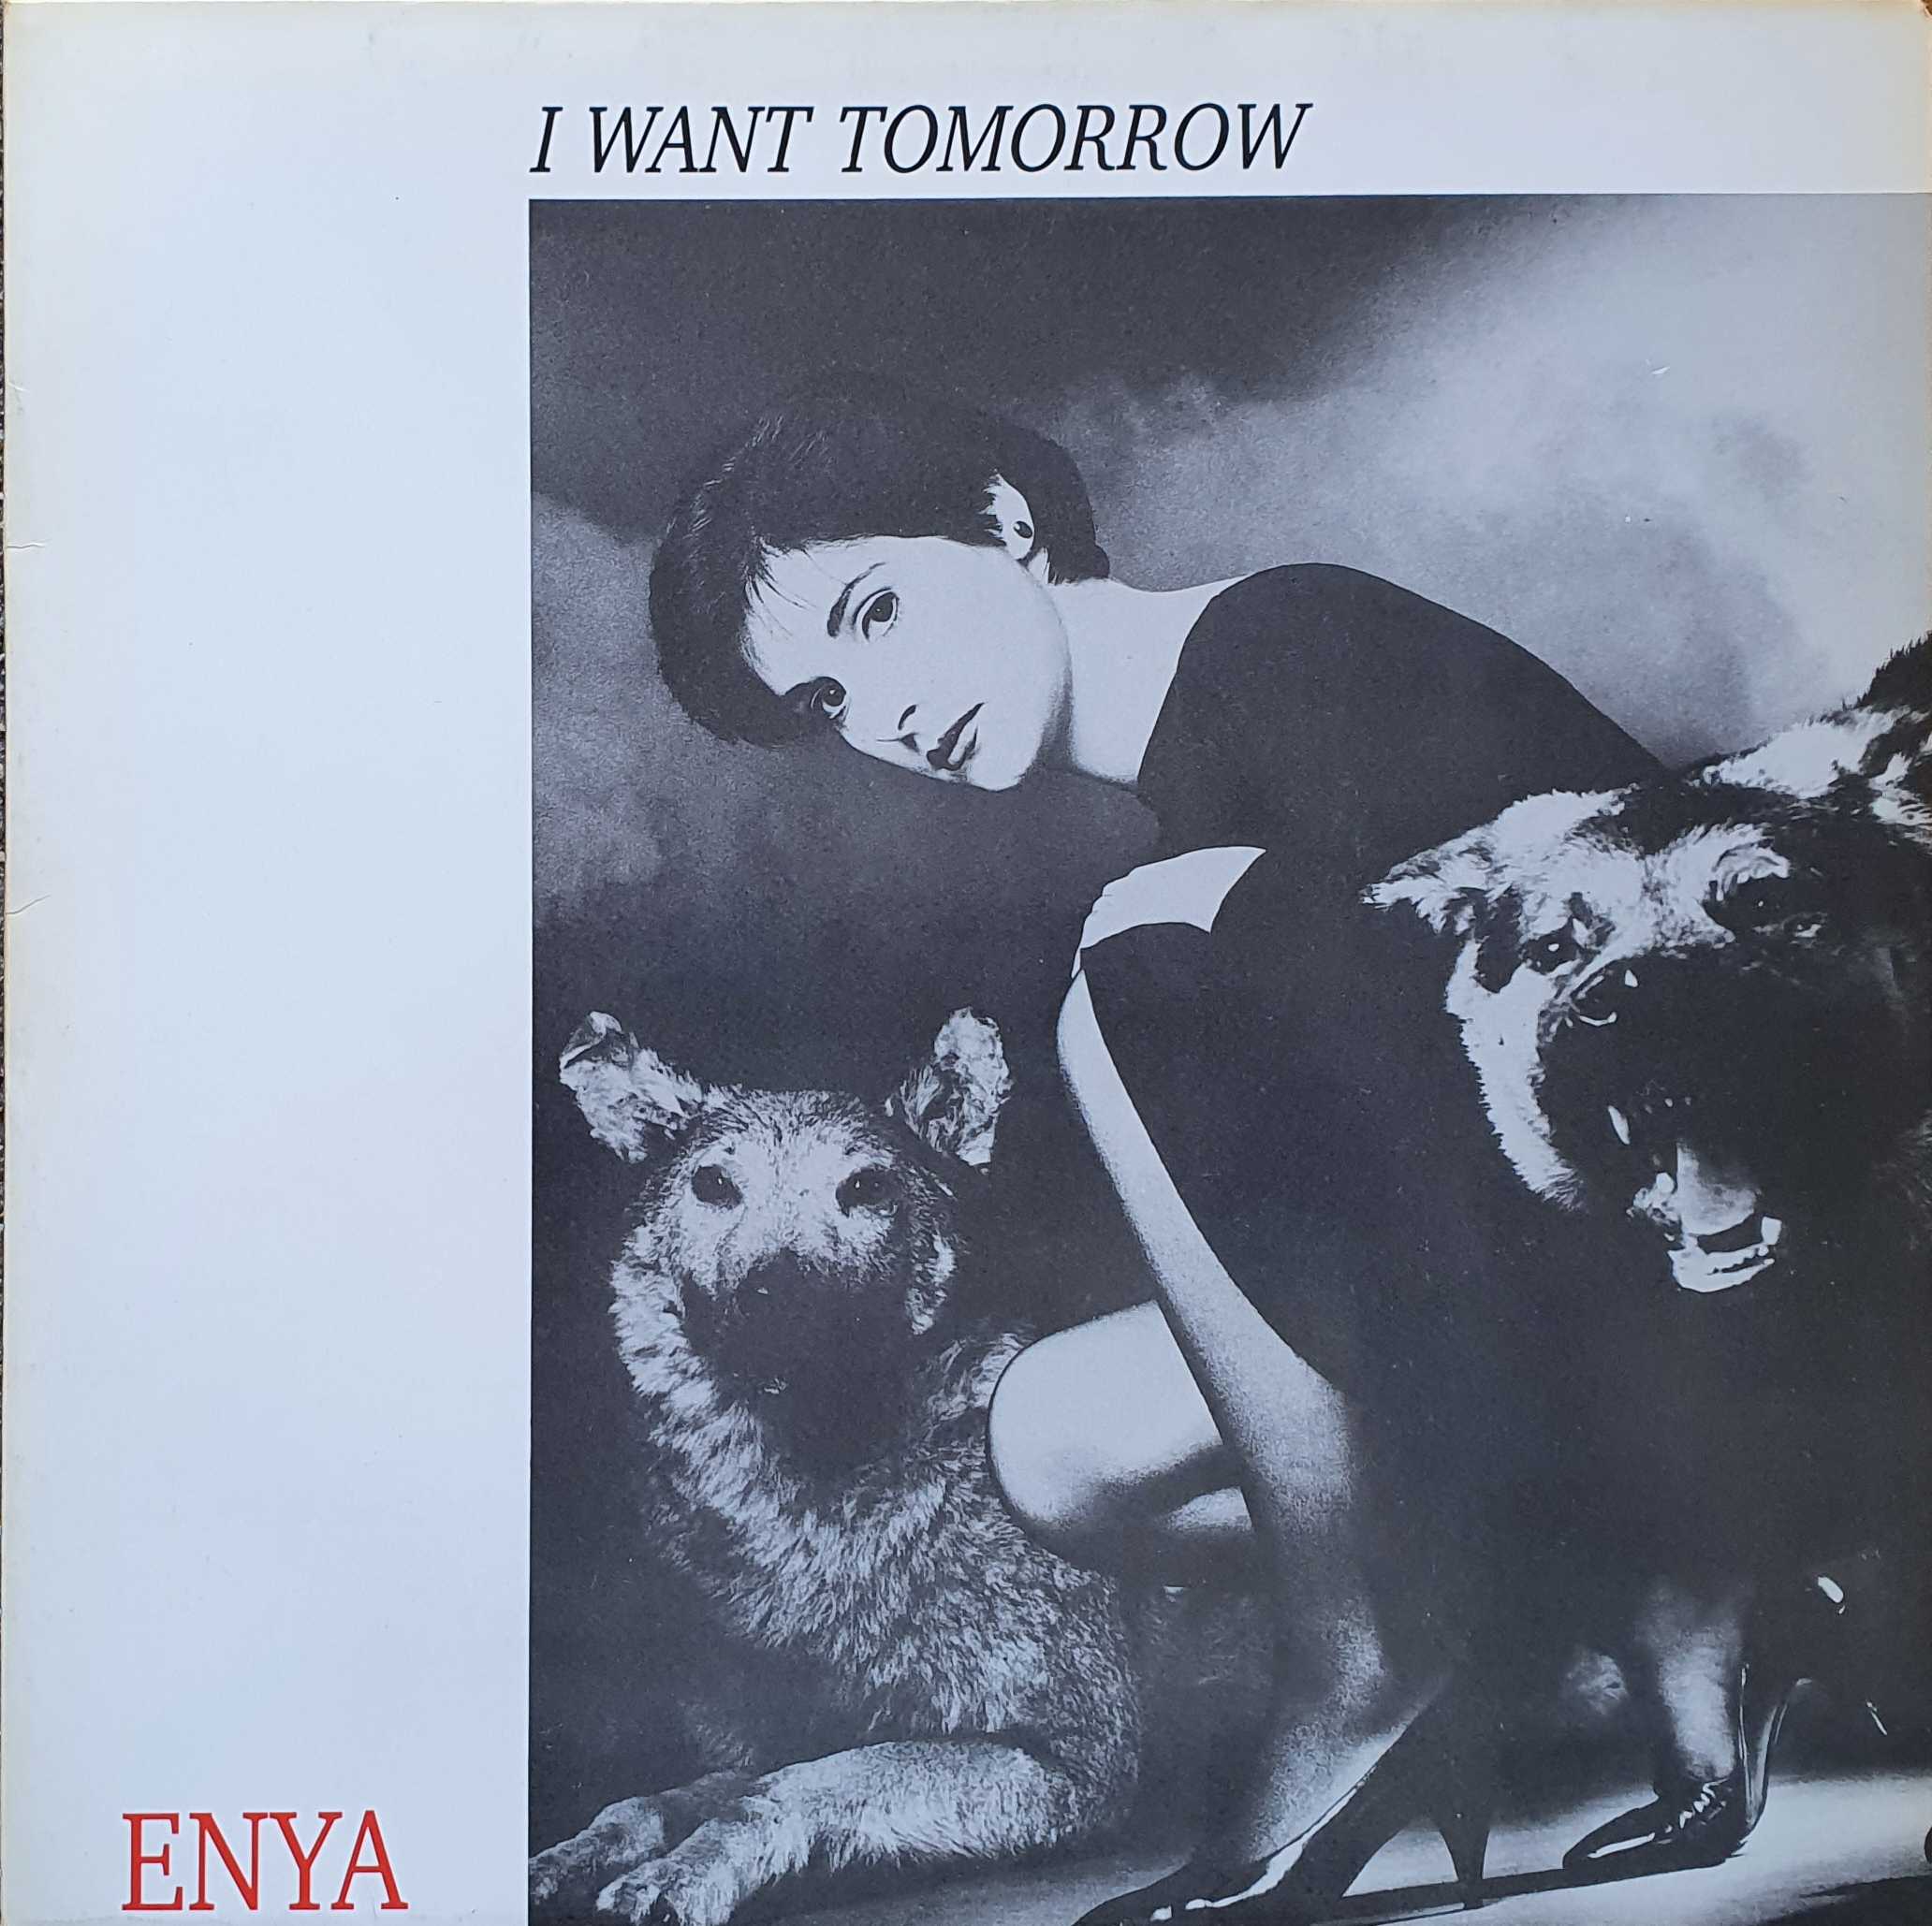 Picture of EDL 2511-0 I want tomorrow (The Celts) - German import by artist Enya / Roma Ryan from the BBC 12inches - Records and Tapes library